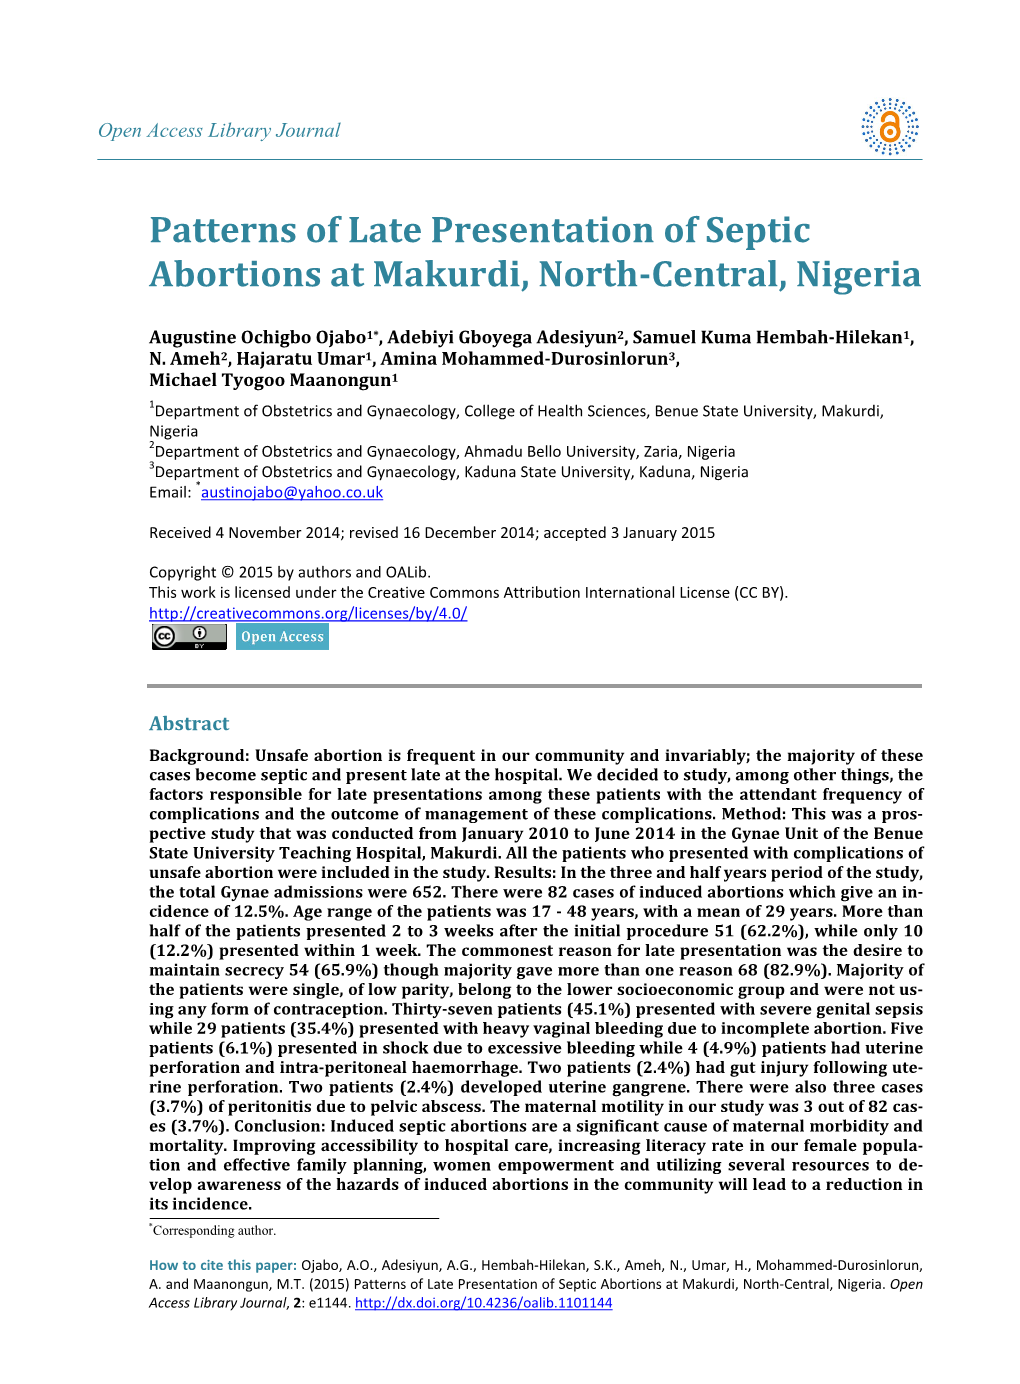 Patterns of Late Presentation of Septic Abortions at Makurdi, North-Central, Nigeria